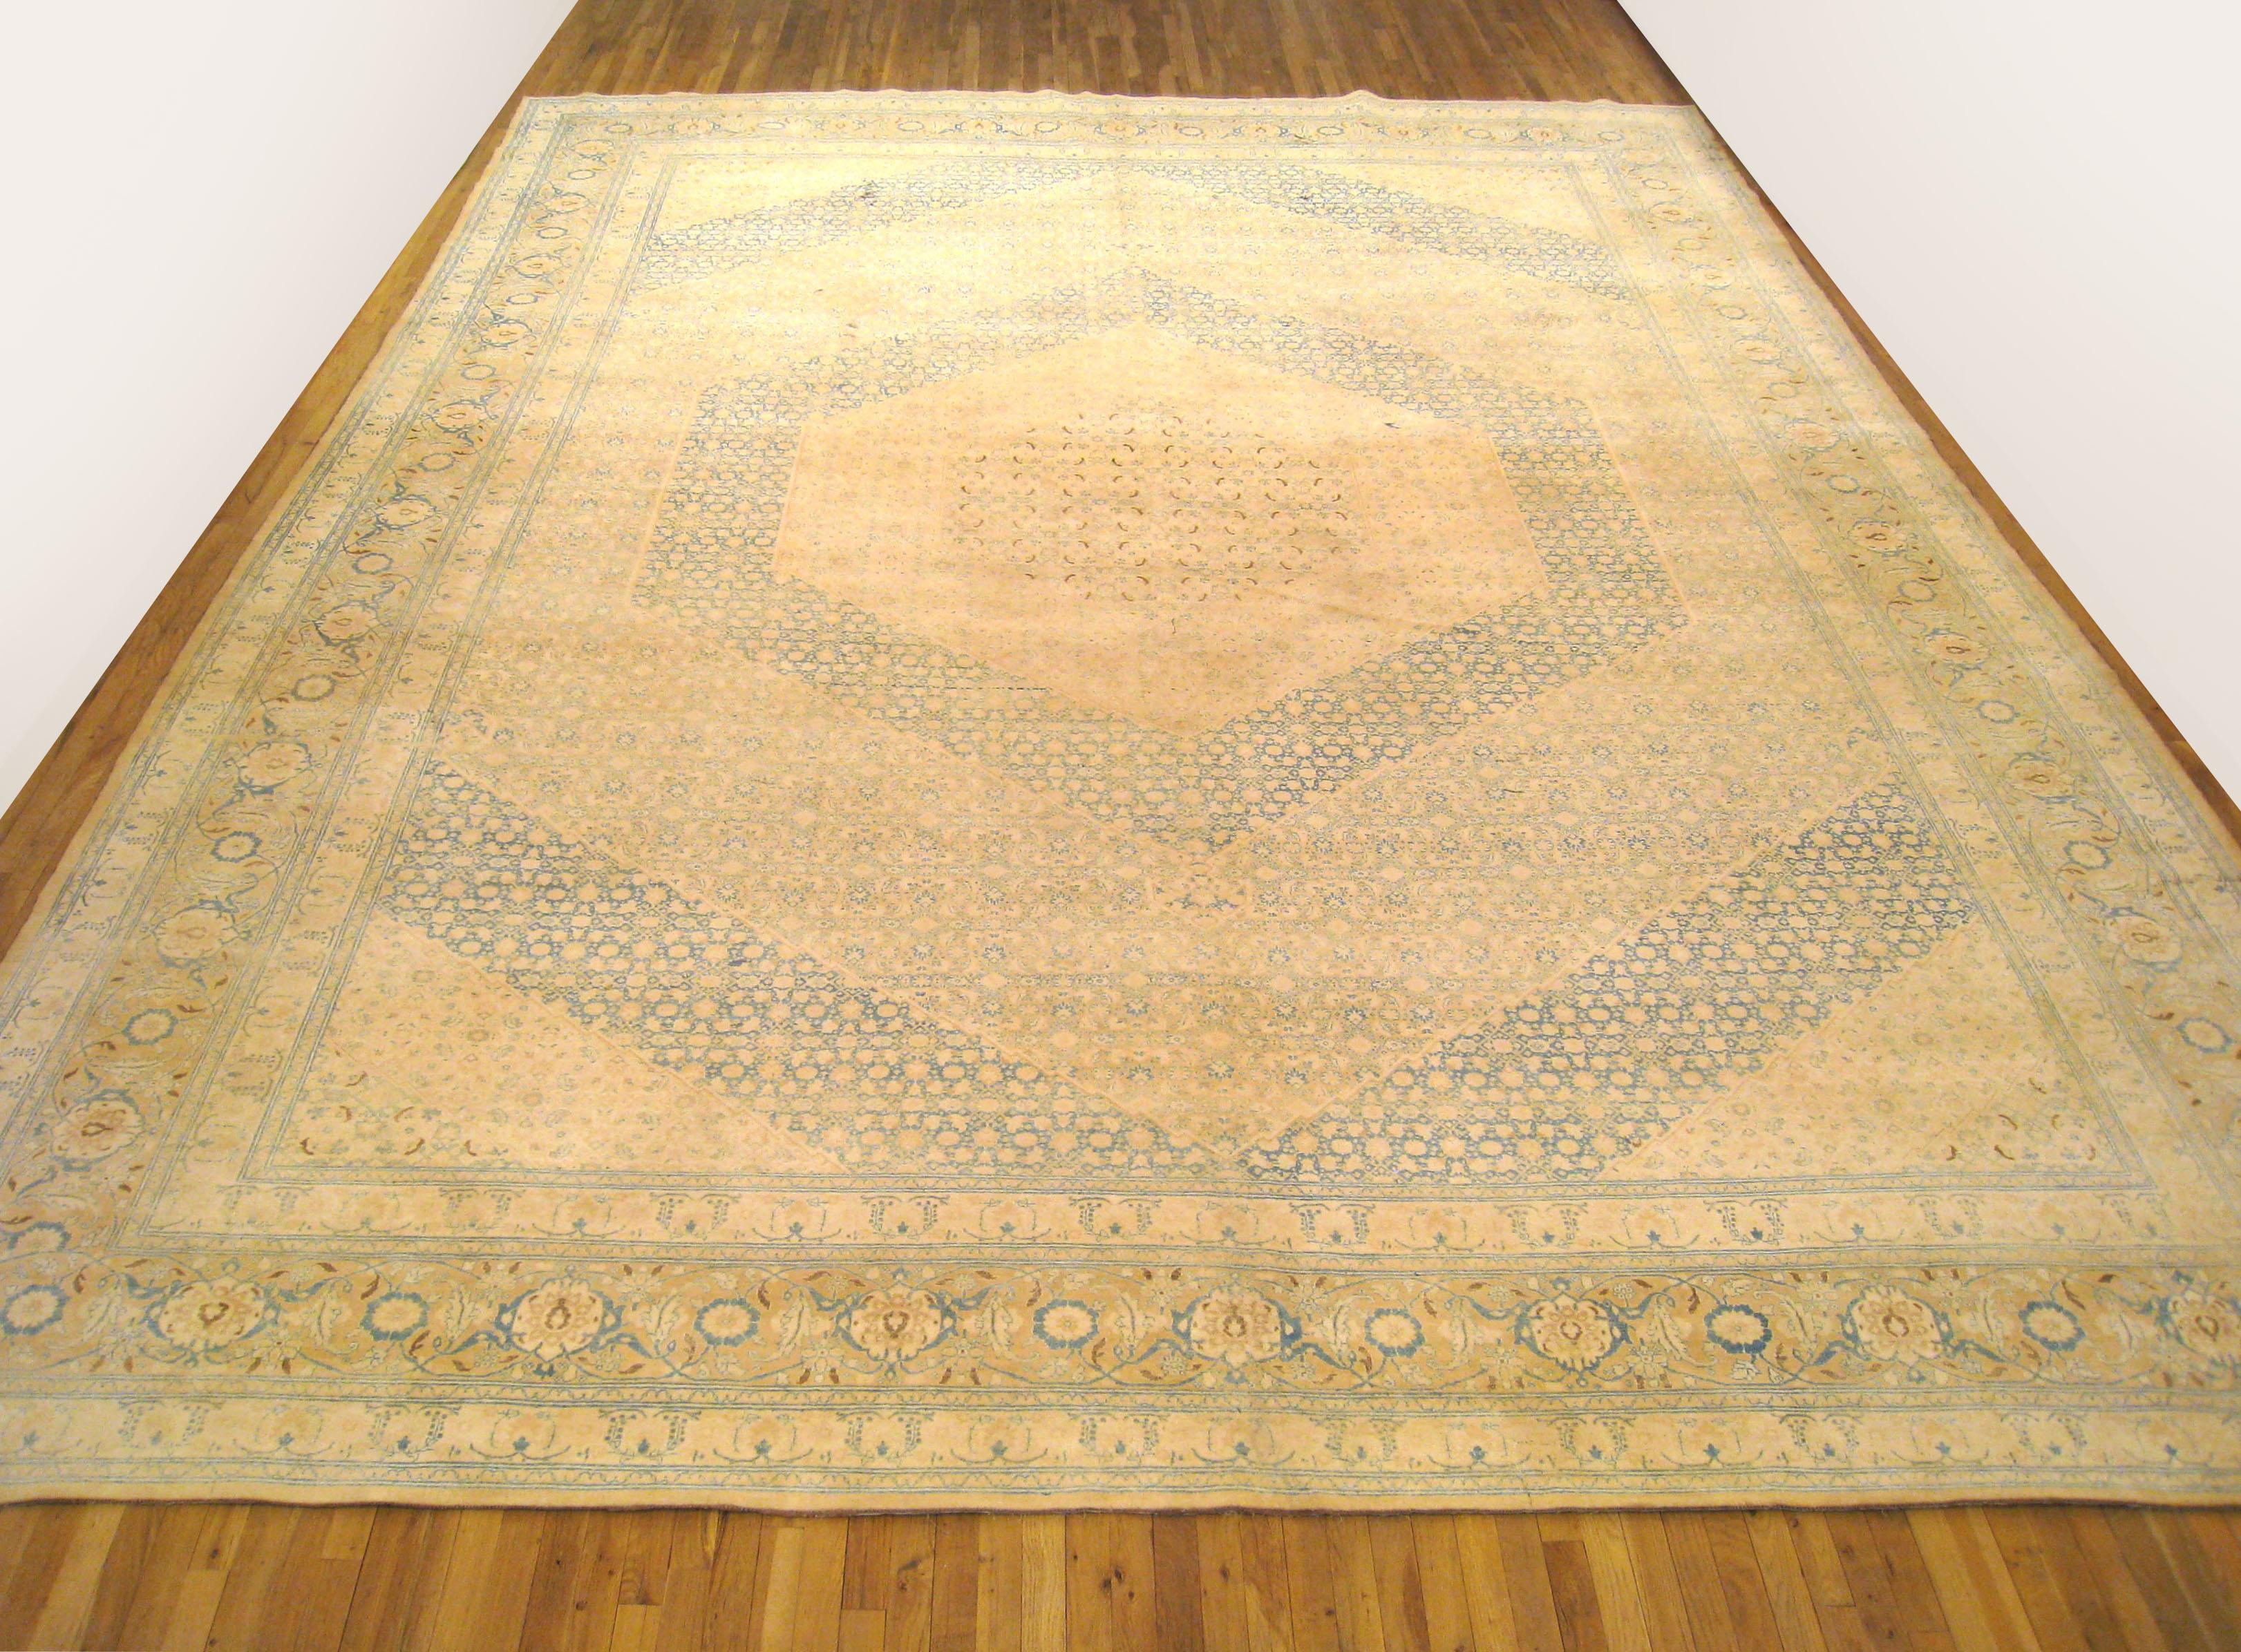 An antique Persian Tabriz oriental carpet, circa 1900, hand knotted with wool in the Tabriz region of Persia. The central field is characterized by a series of expanding medallions, as well as a repeating Herati design throughout. Soft colors.